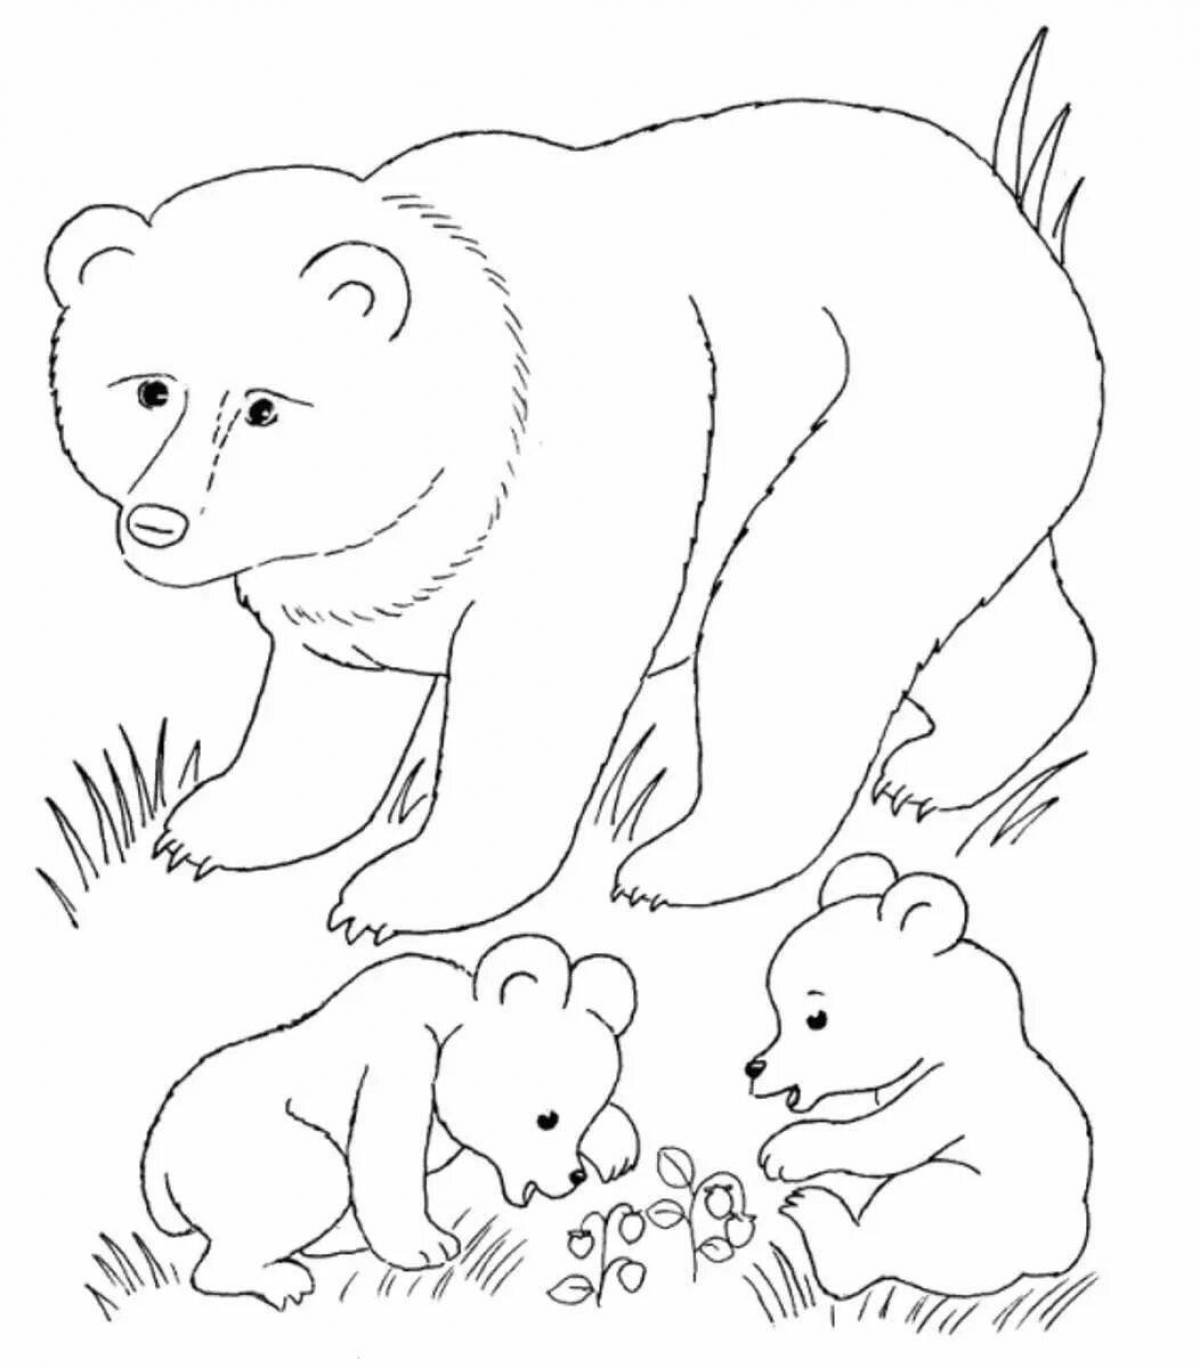 Live teddy bear with cubs coloring